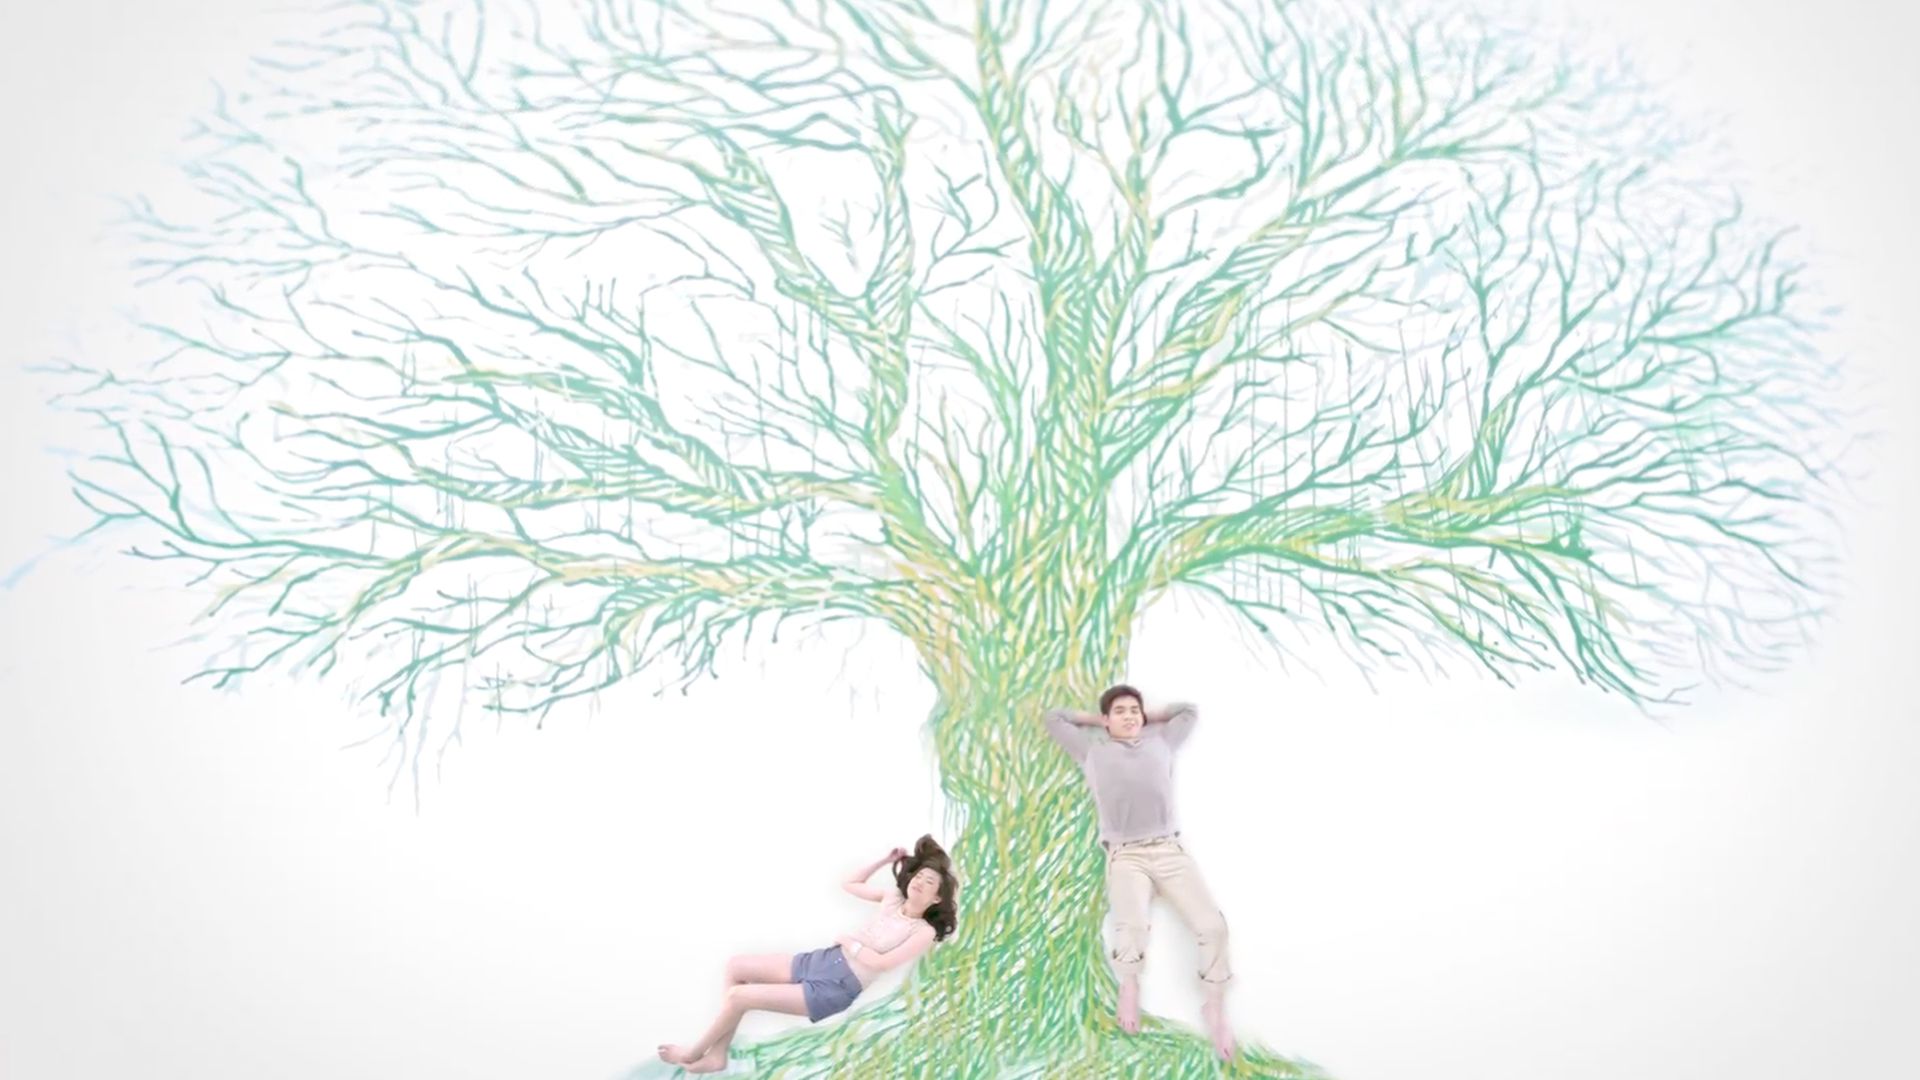 BOYSEN KNOxOUT “Growing Tree” TVC